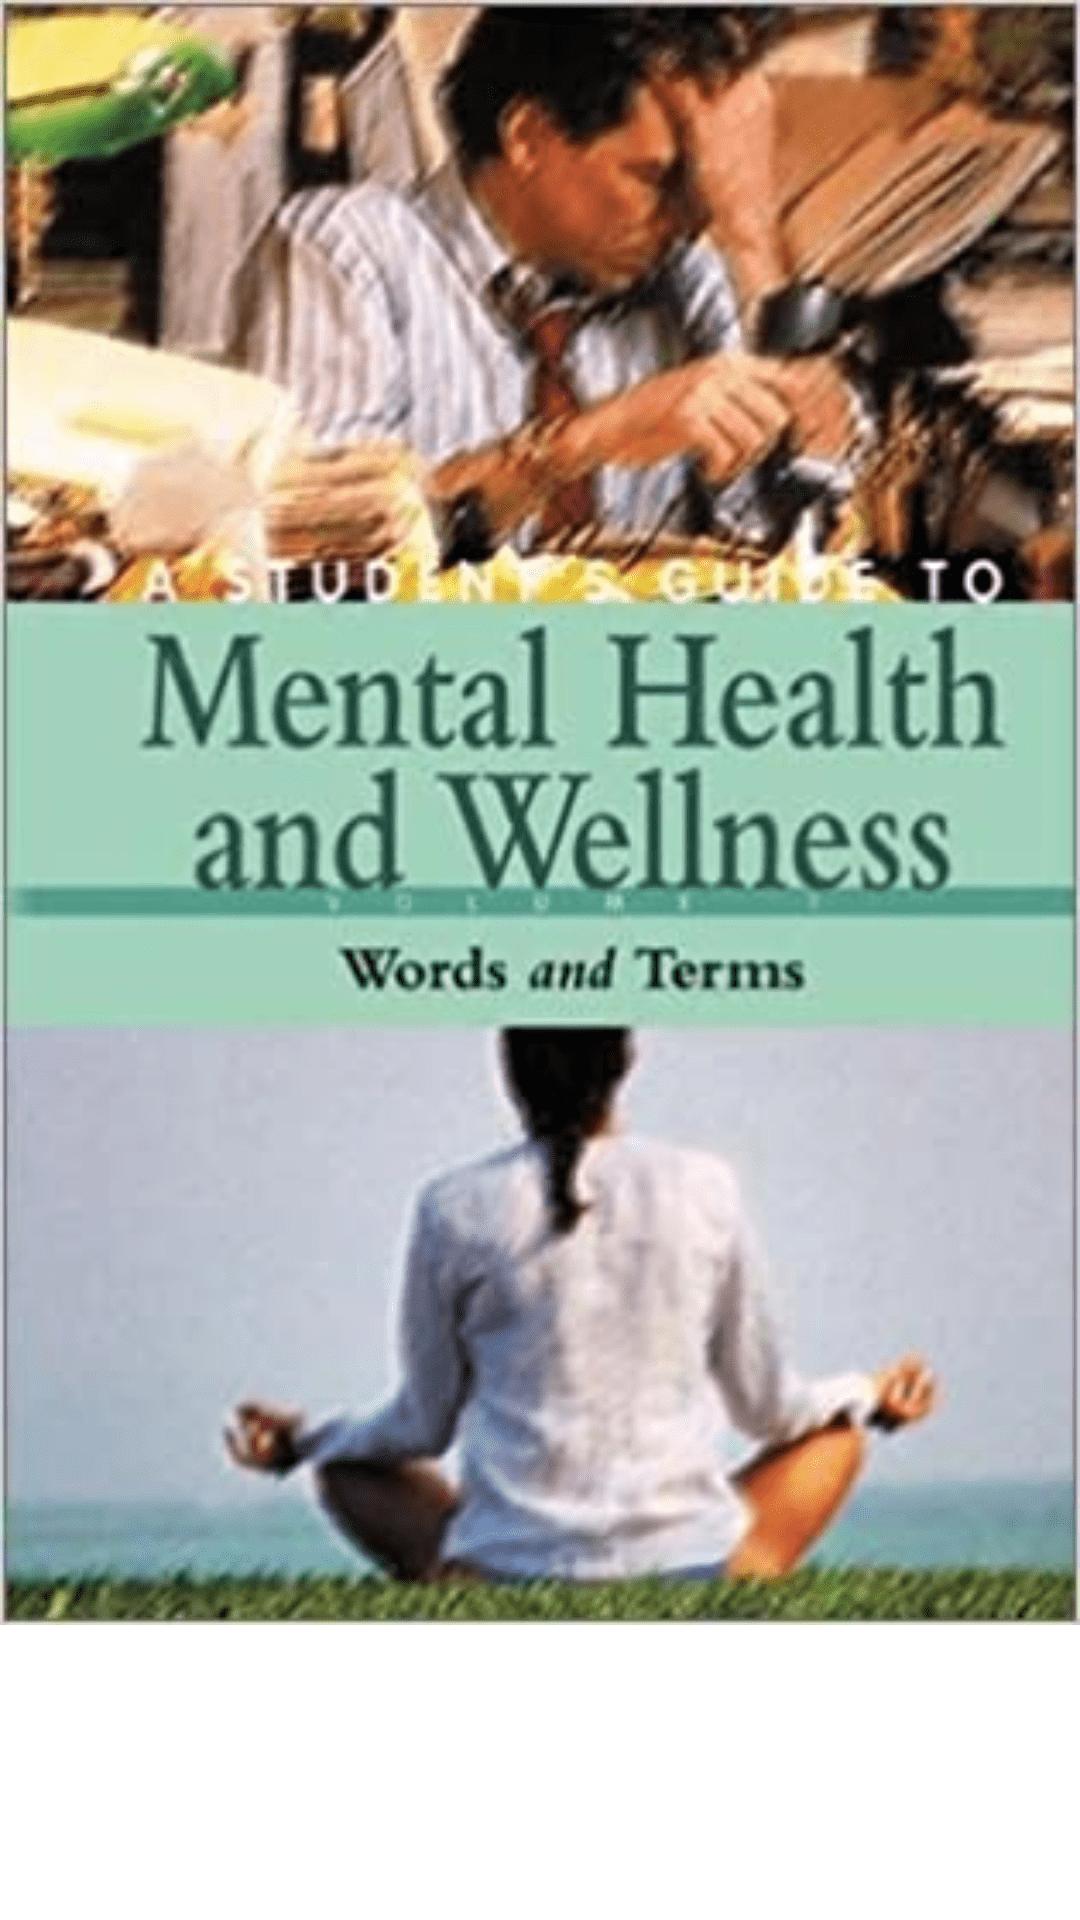 A Student's Guide to Mental Health and Wellness